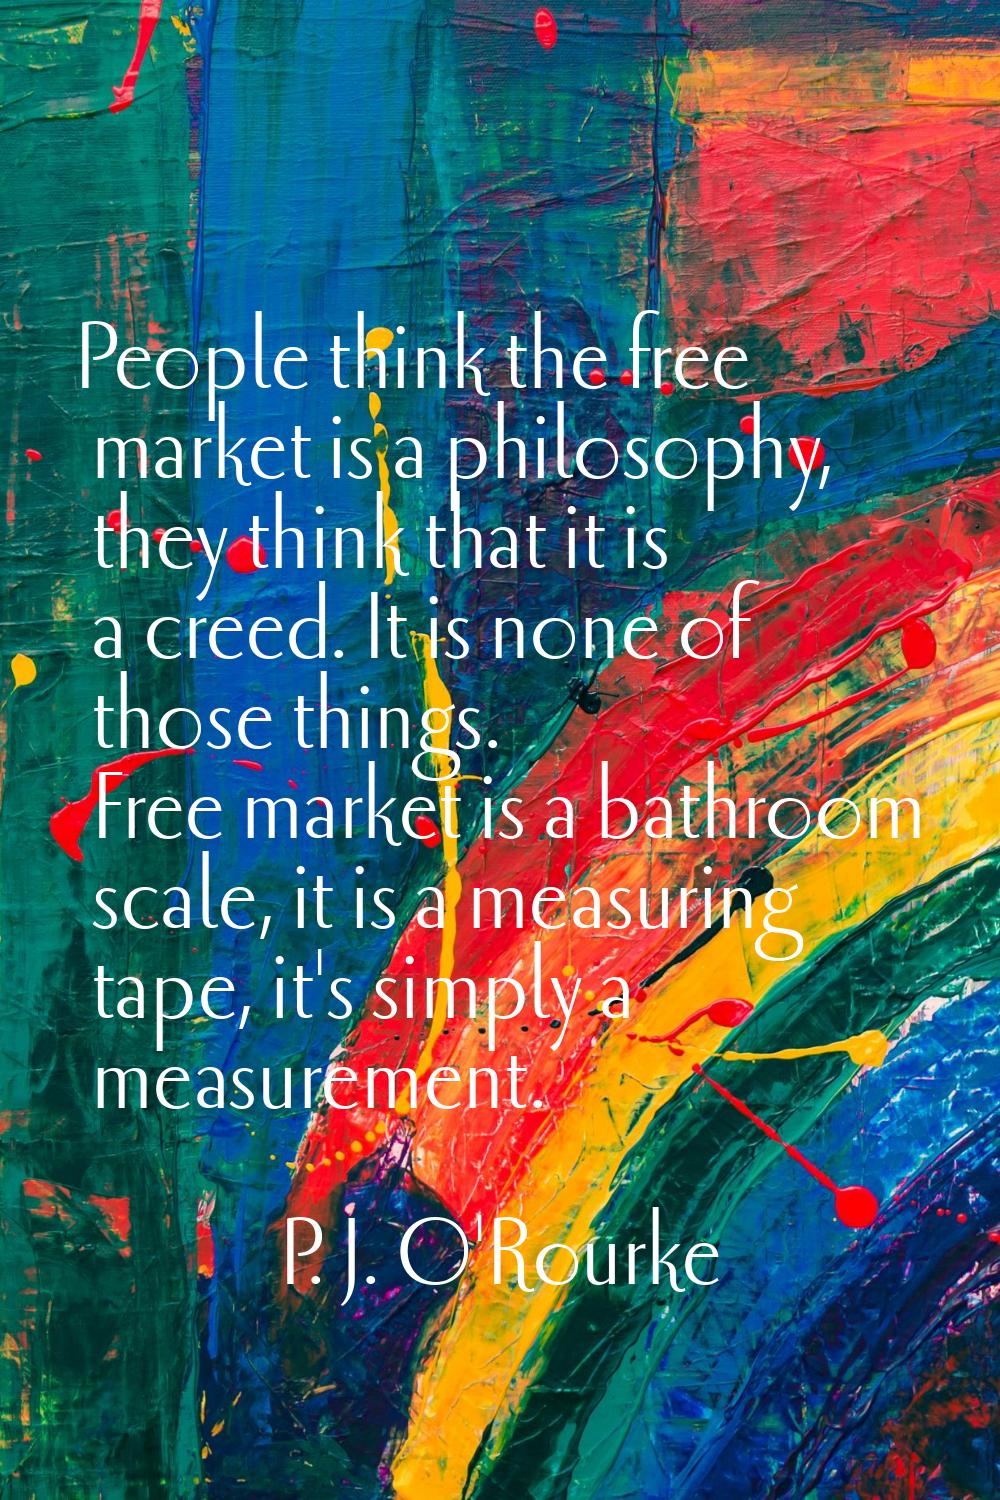 People think the free market is a philosophy, they think that it is a creed. It is none of those th